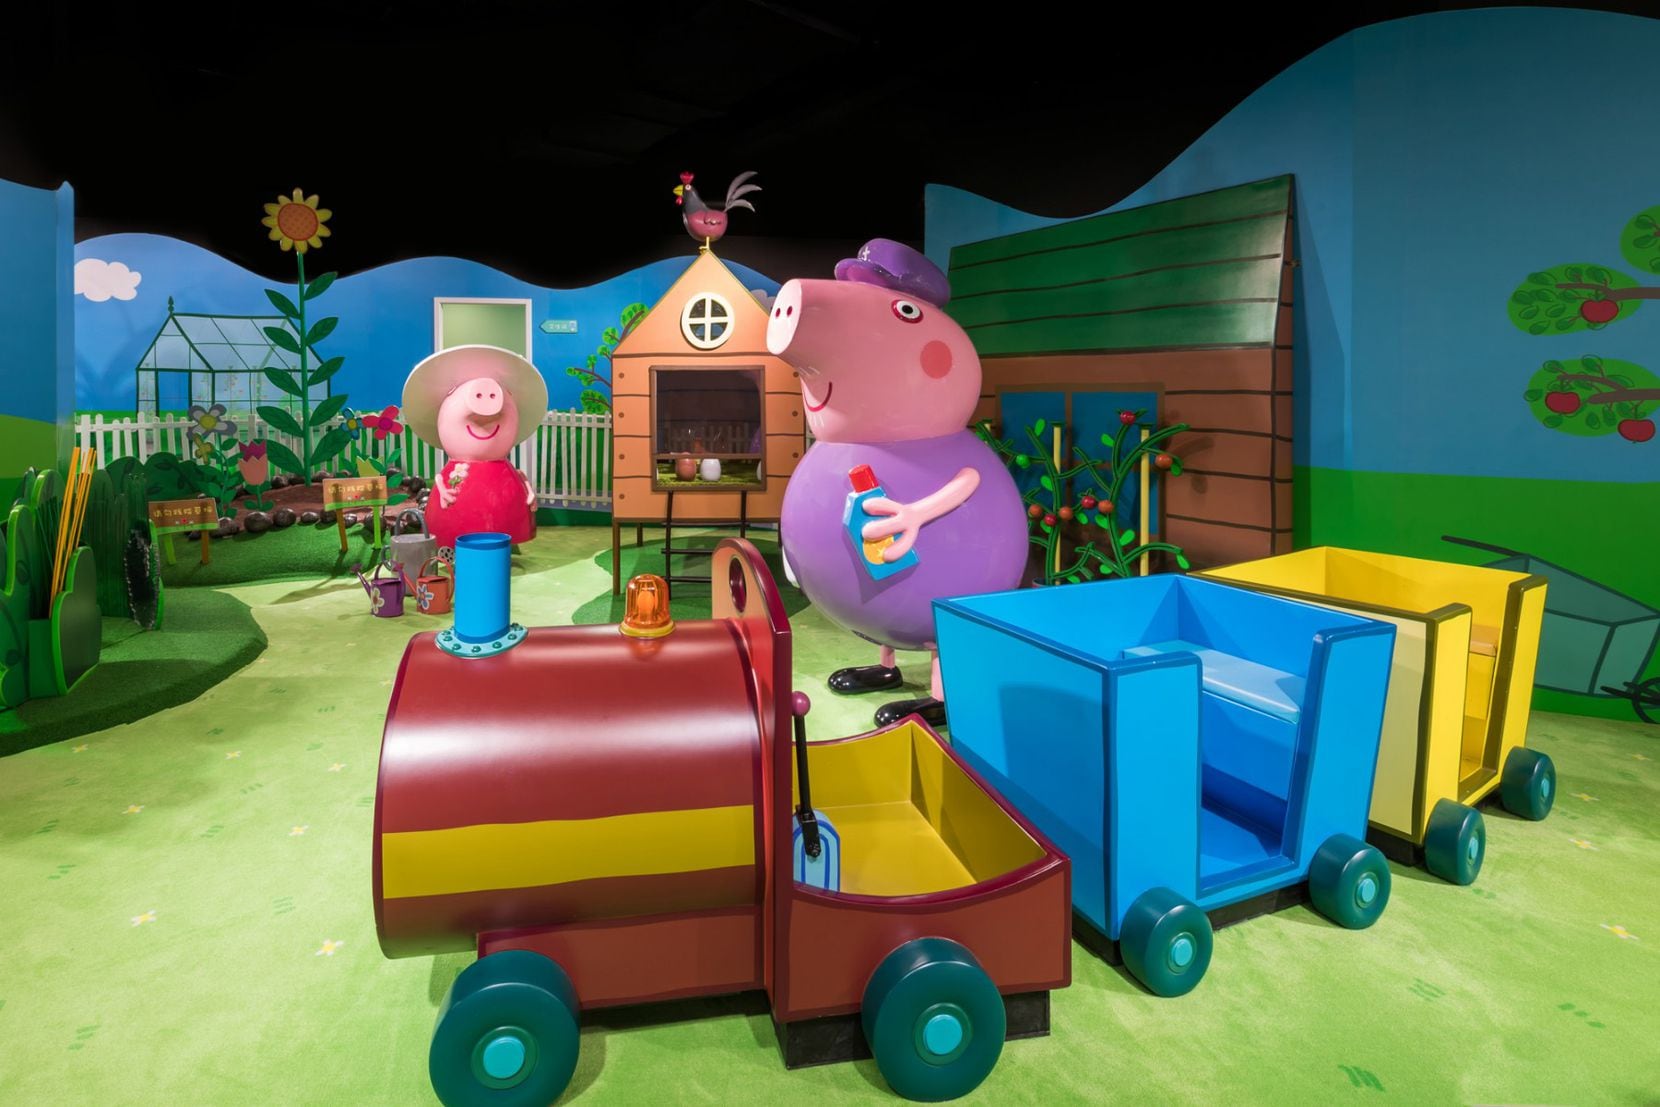 Preschoolers can learn to garden and farm at Grandma and Grandpa Pig's place.